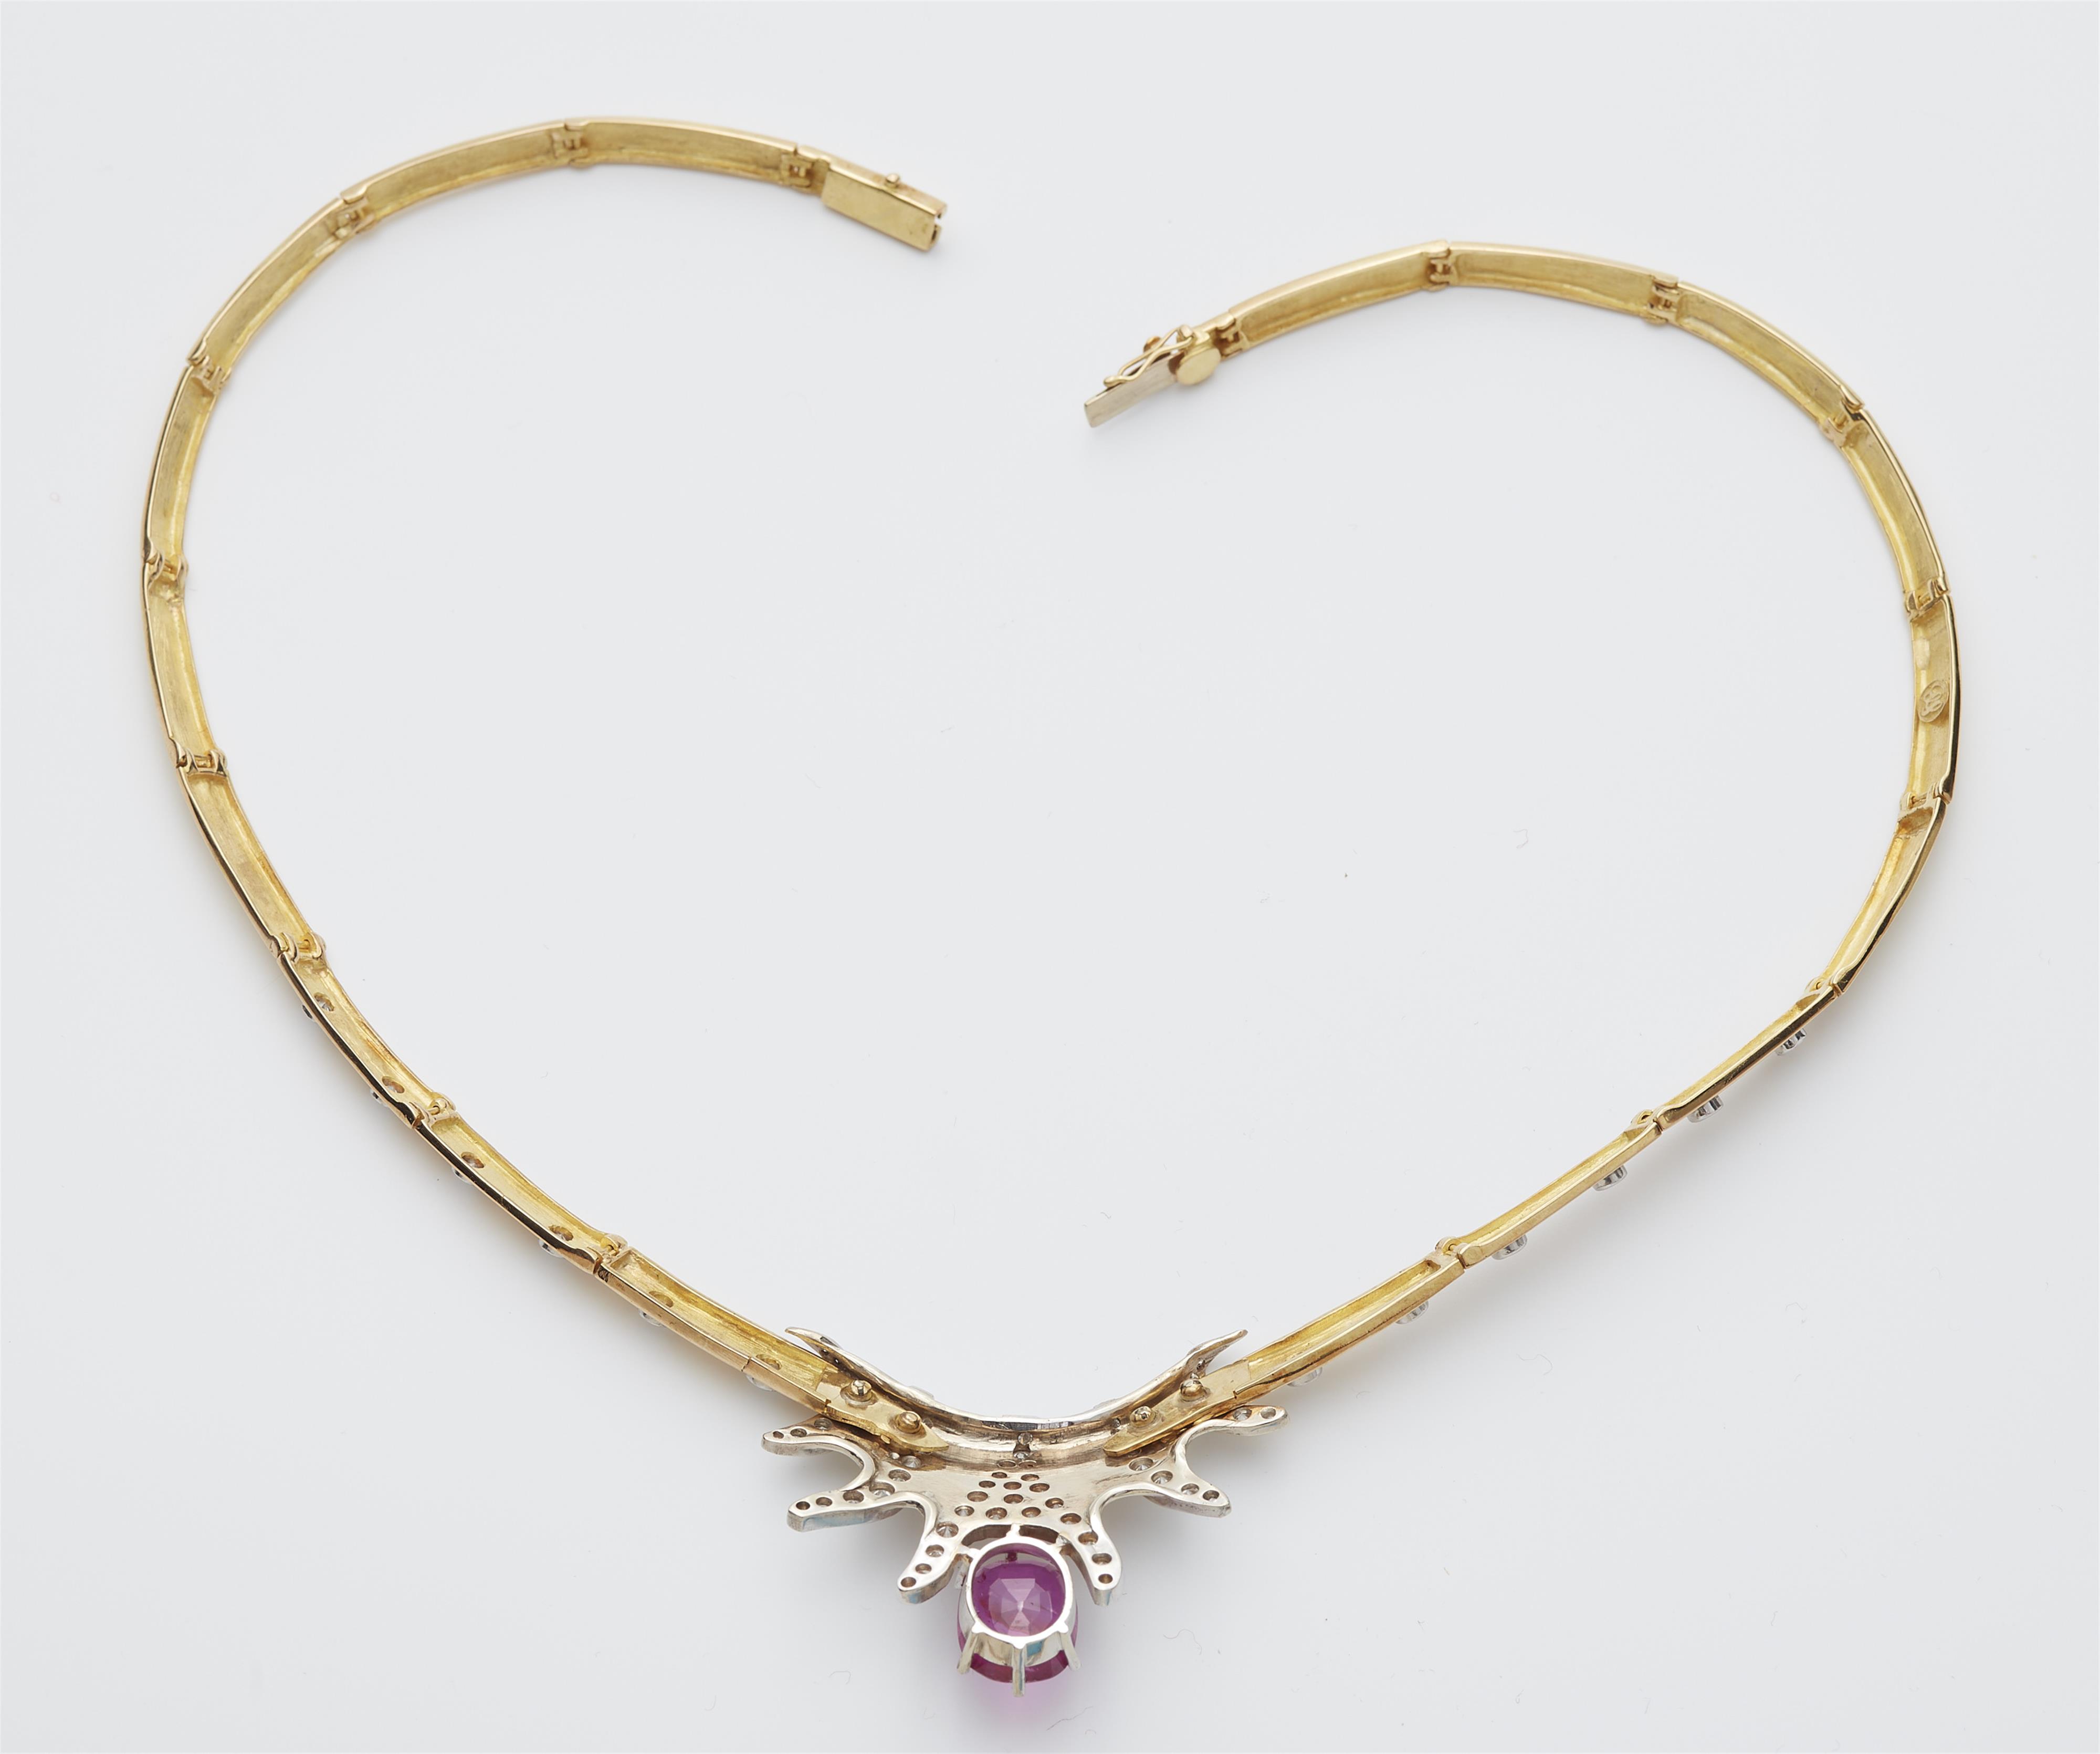 An Austrian 18k bicolour gold diamond necklace with an important natural Burmese ruby c. 6.5 ct. - image-3